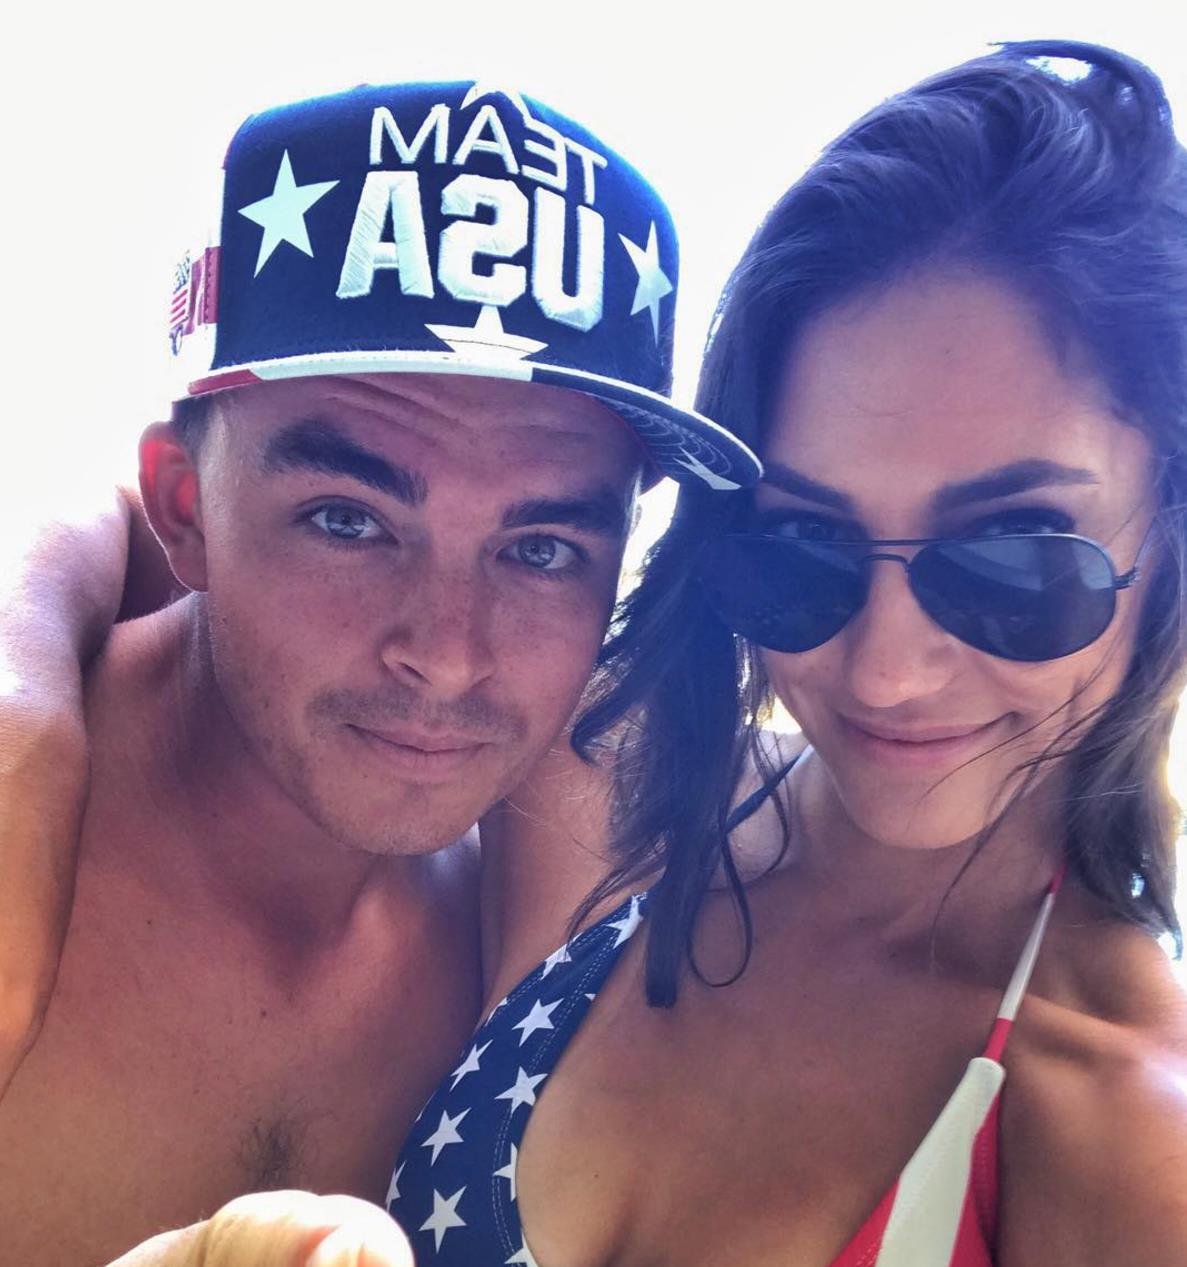 How long has Rickie fowler been married to Allison Stokke, the wife of ...